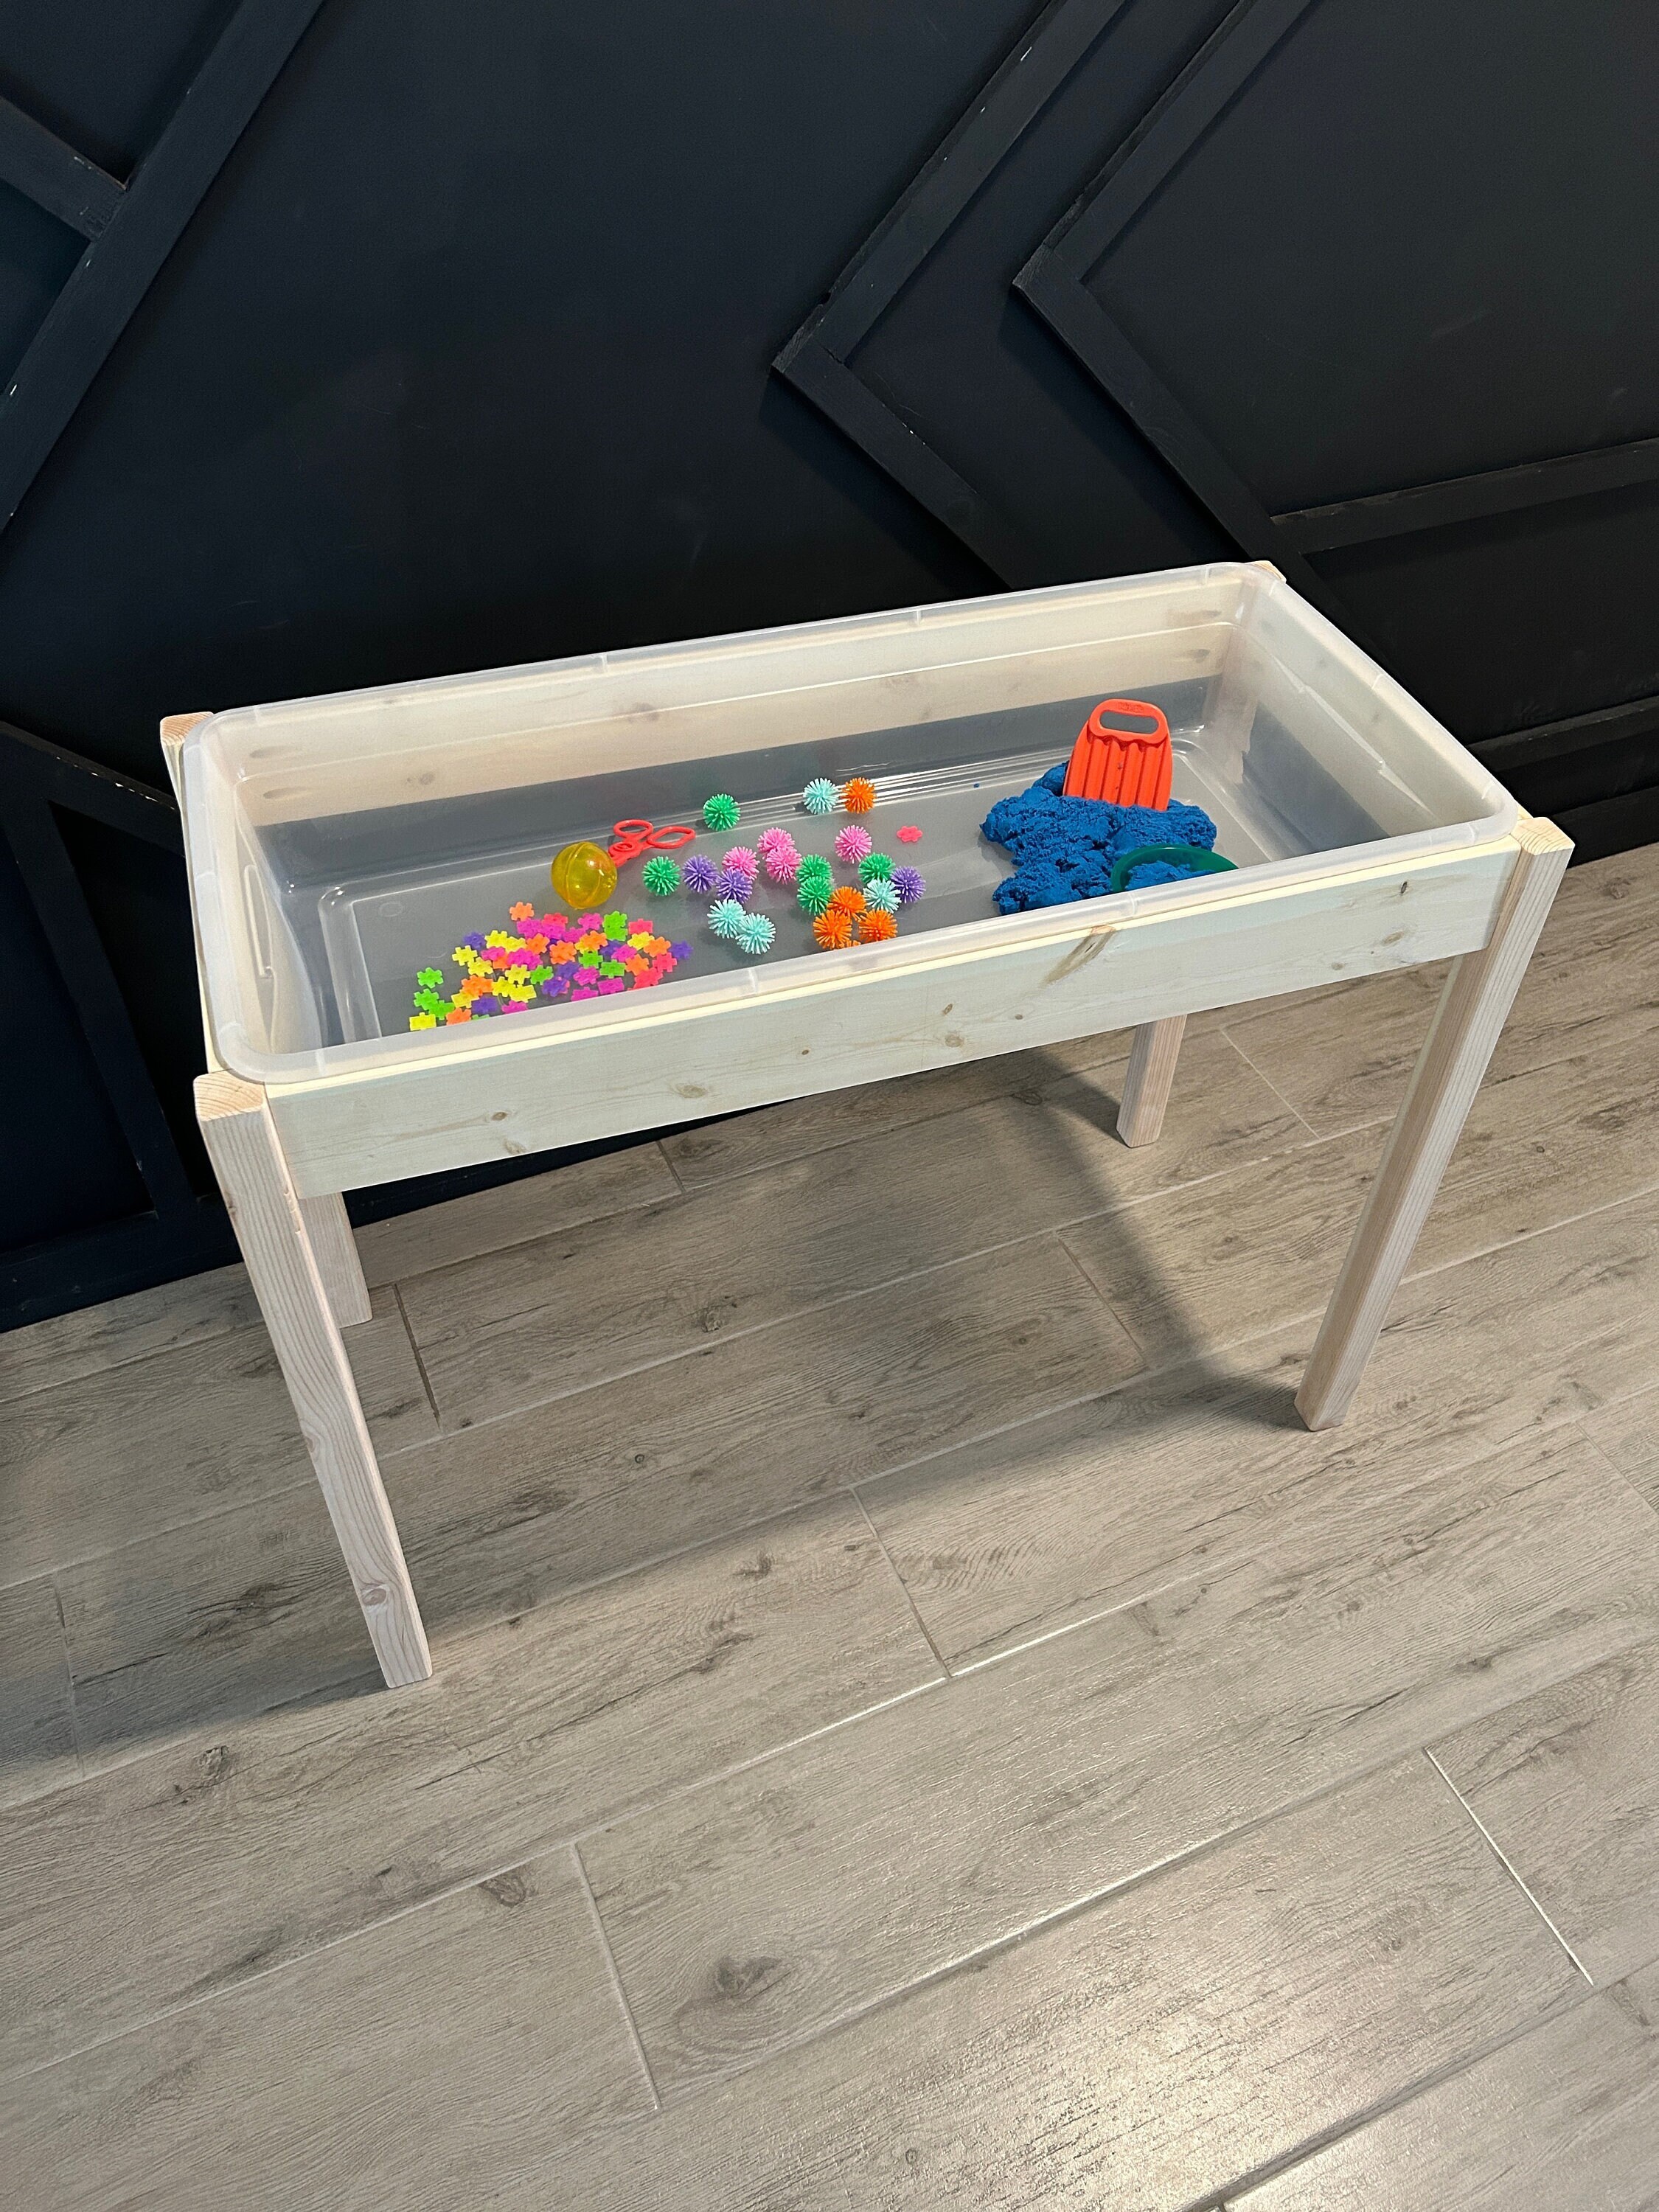 Sensory Table, Activity Table With Roll Paper Holder, Water and Sand Table,  Wooden Play Table 